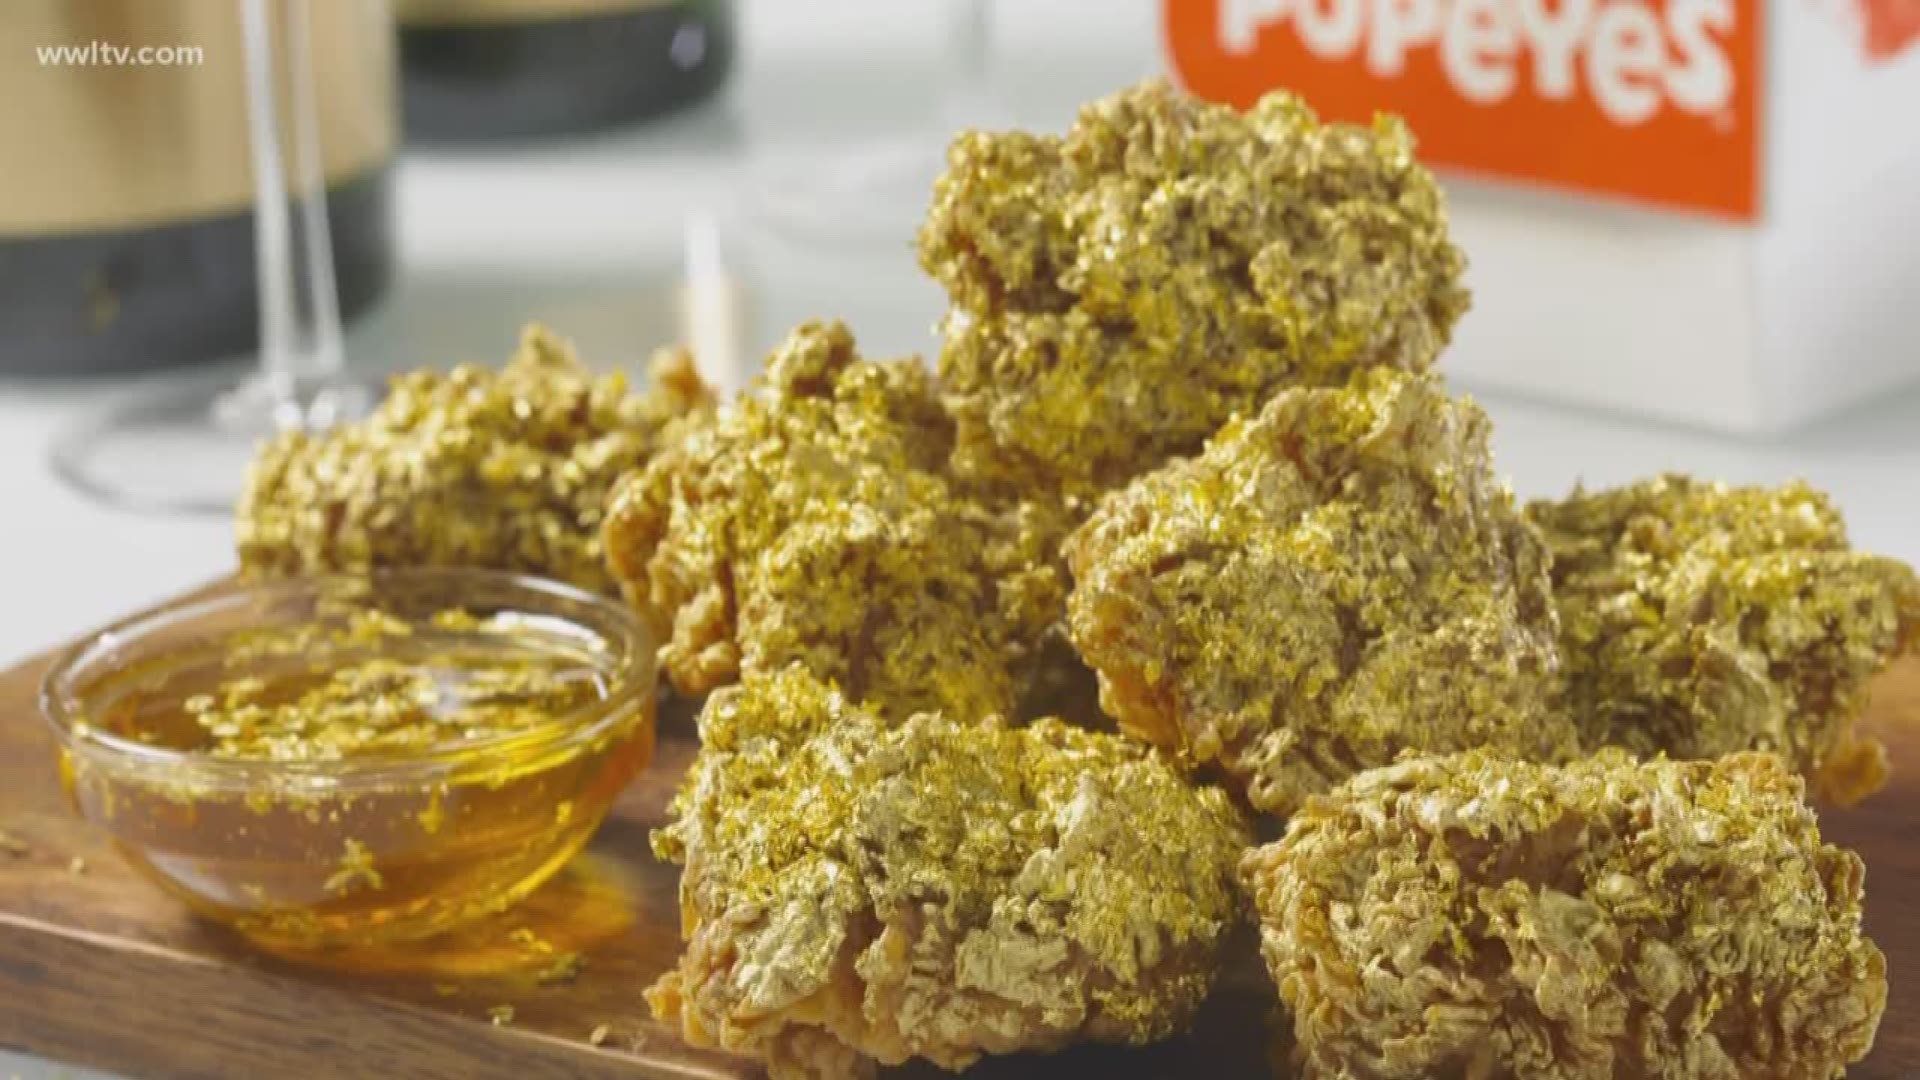 Popeyes is celebrating the opening of its 3,000 store by selling 24 karat gold boneless chicken wings. 